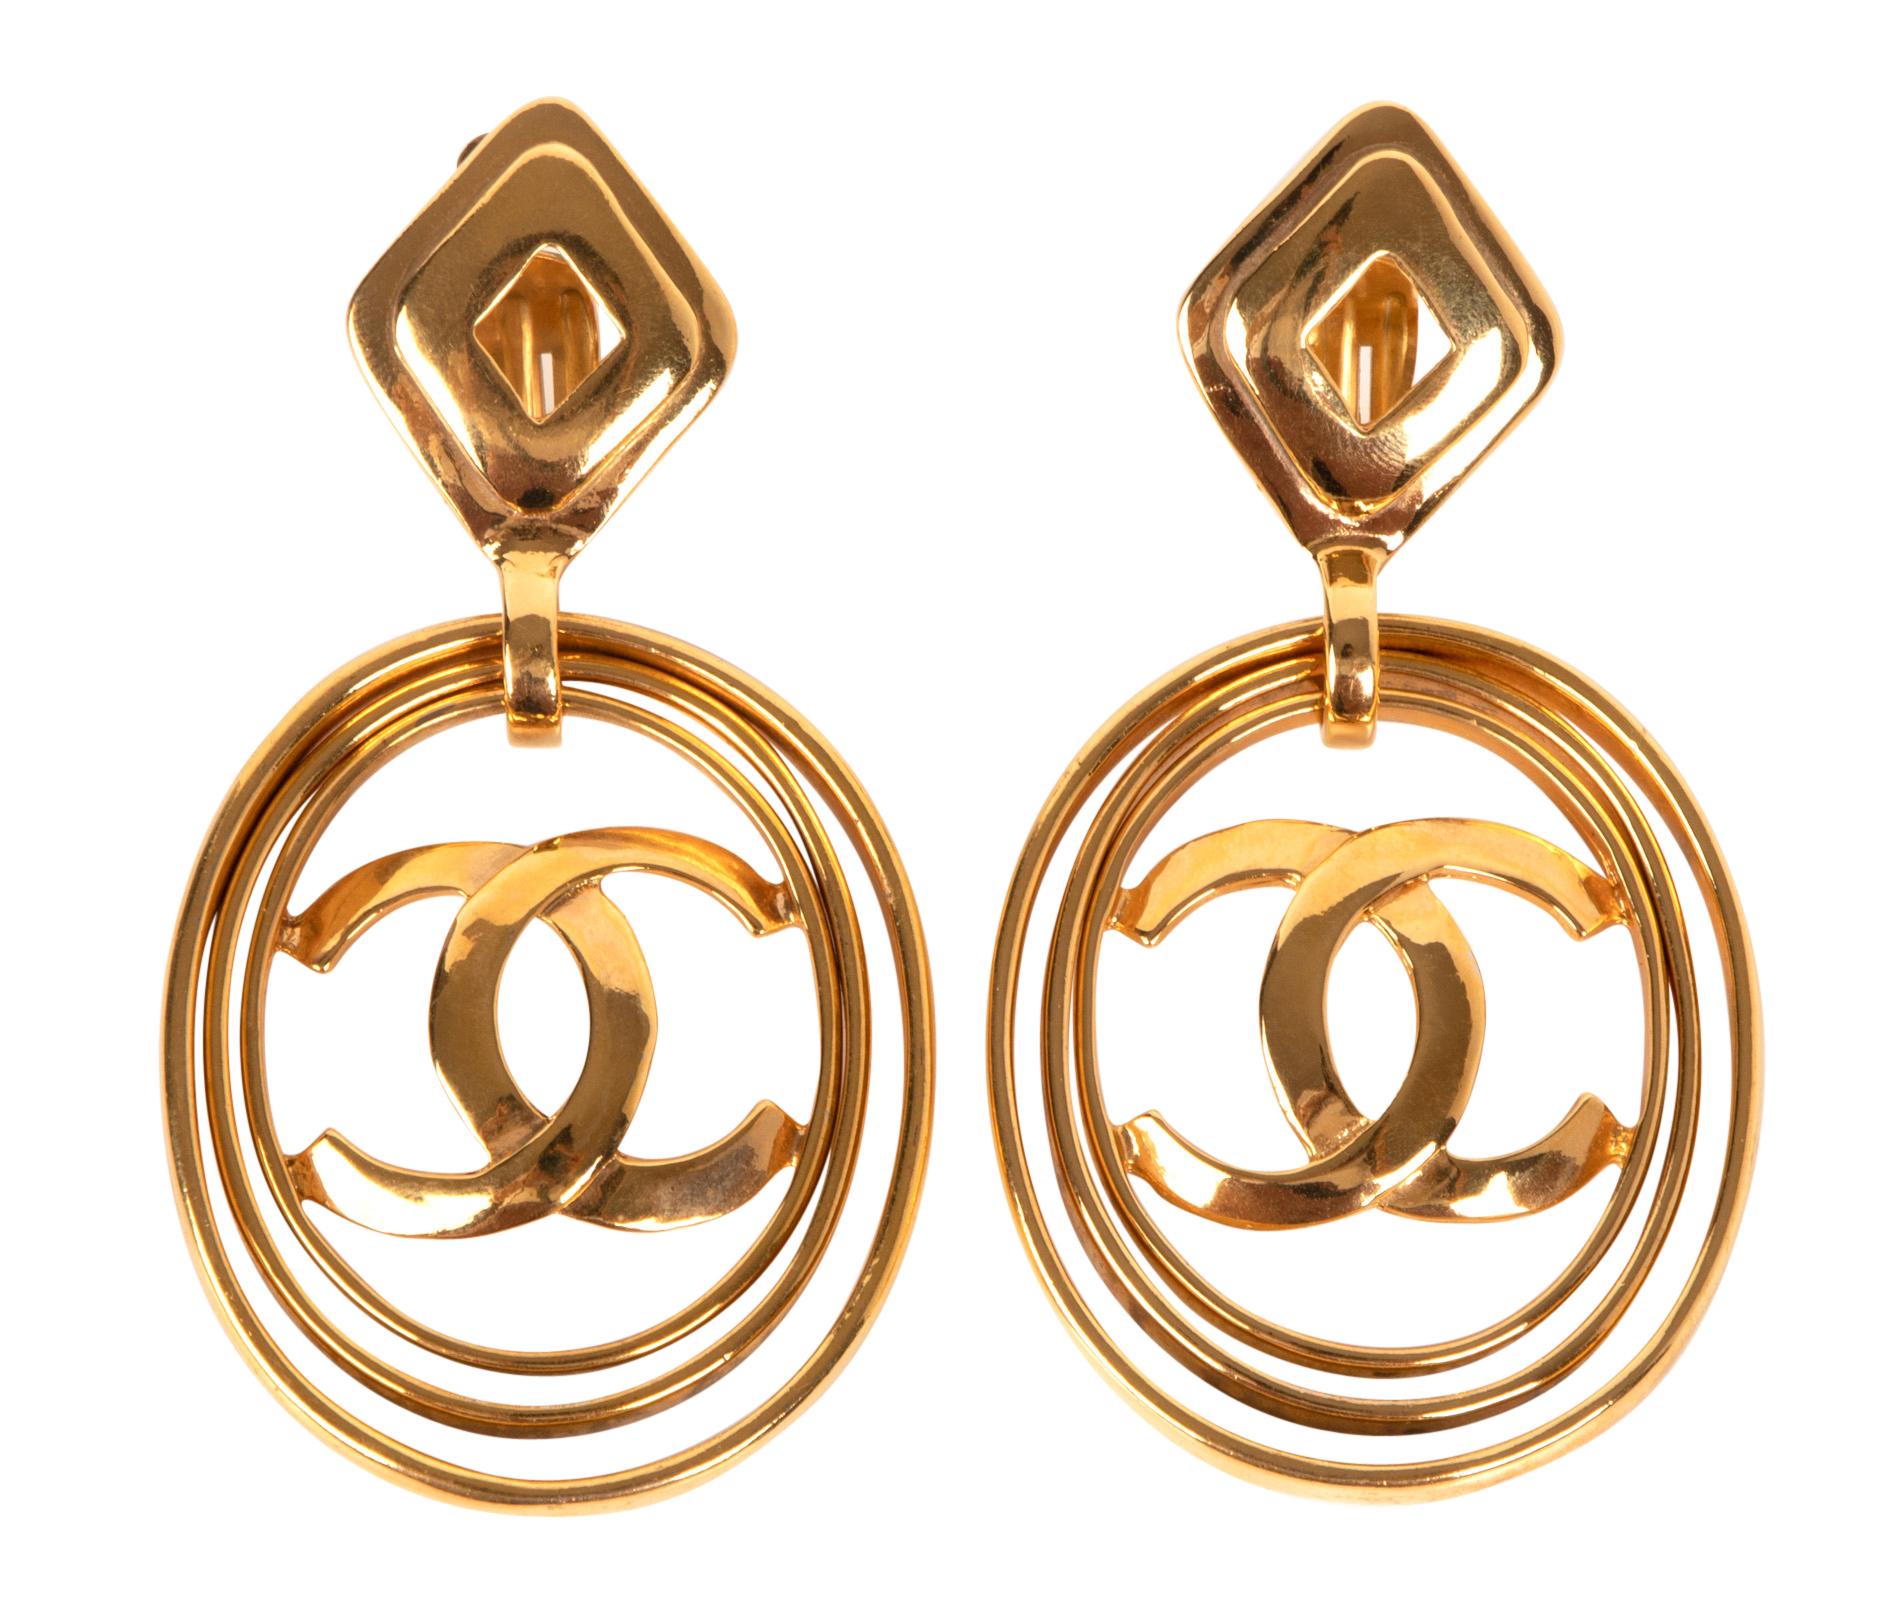 Mightychic offers a pair of fabulous Chanel clip on oval hoop3 way  earrings.   
Large CC set in center hoop.
2 surrounding hoops have great movement and are each detachable!
Can be worn with single hoop, 2 hoops, or with all 3.
EXCEPTIONAL! 
final